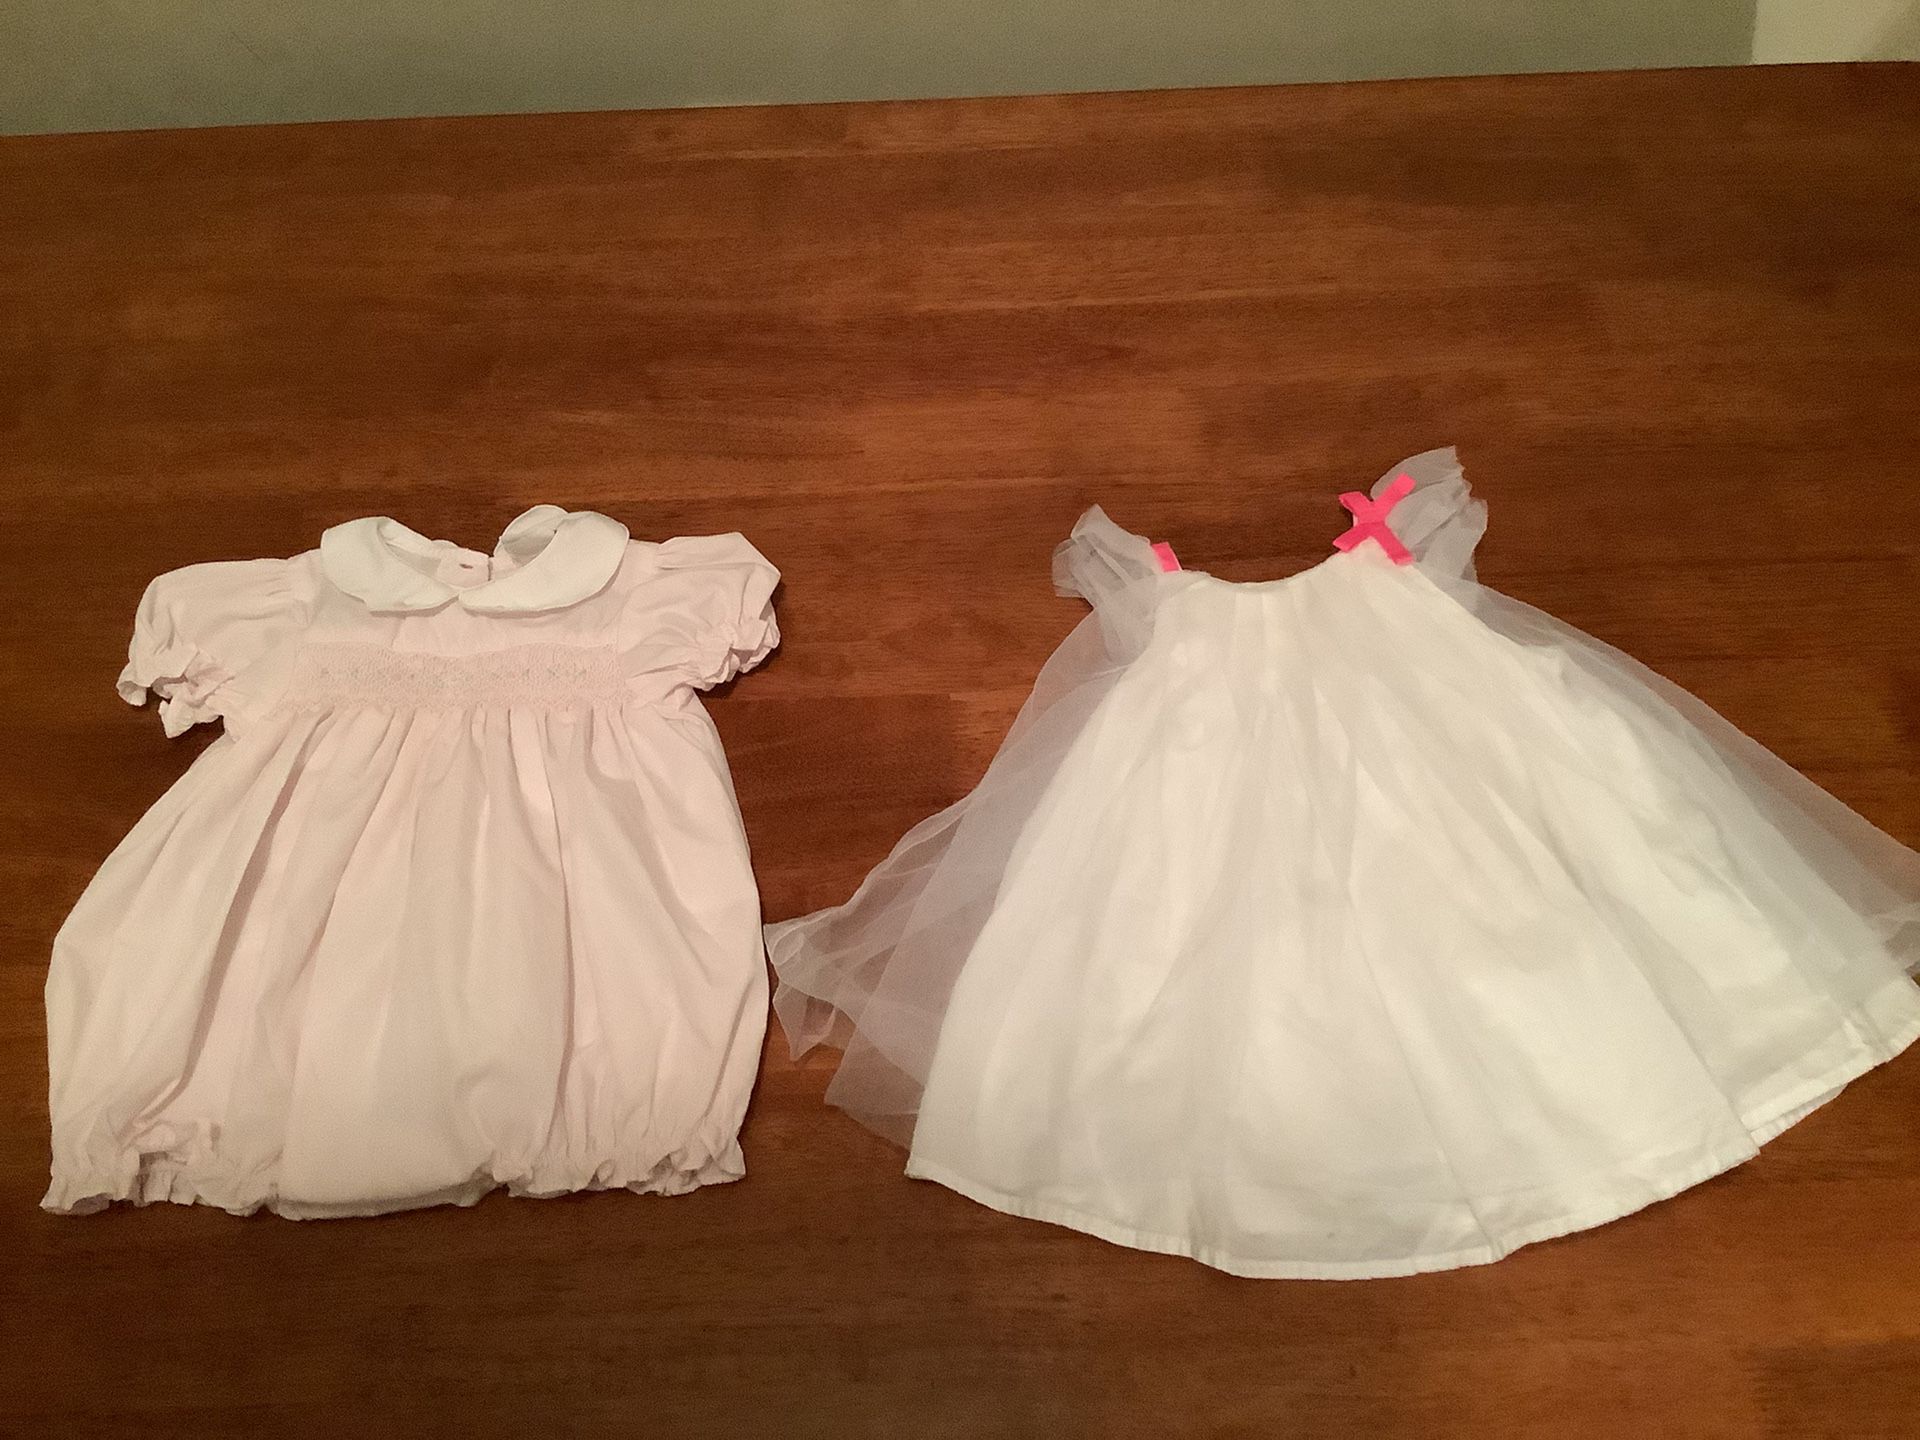 Girls 6 Months White Dress With Netting Overlay Baby Bgosh And Petit Ami Smocking Outfit Light Pink